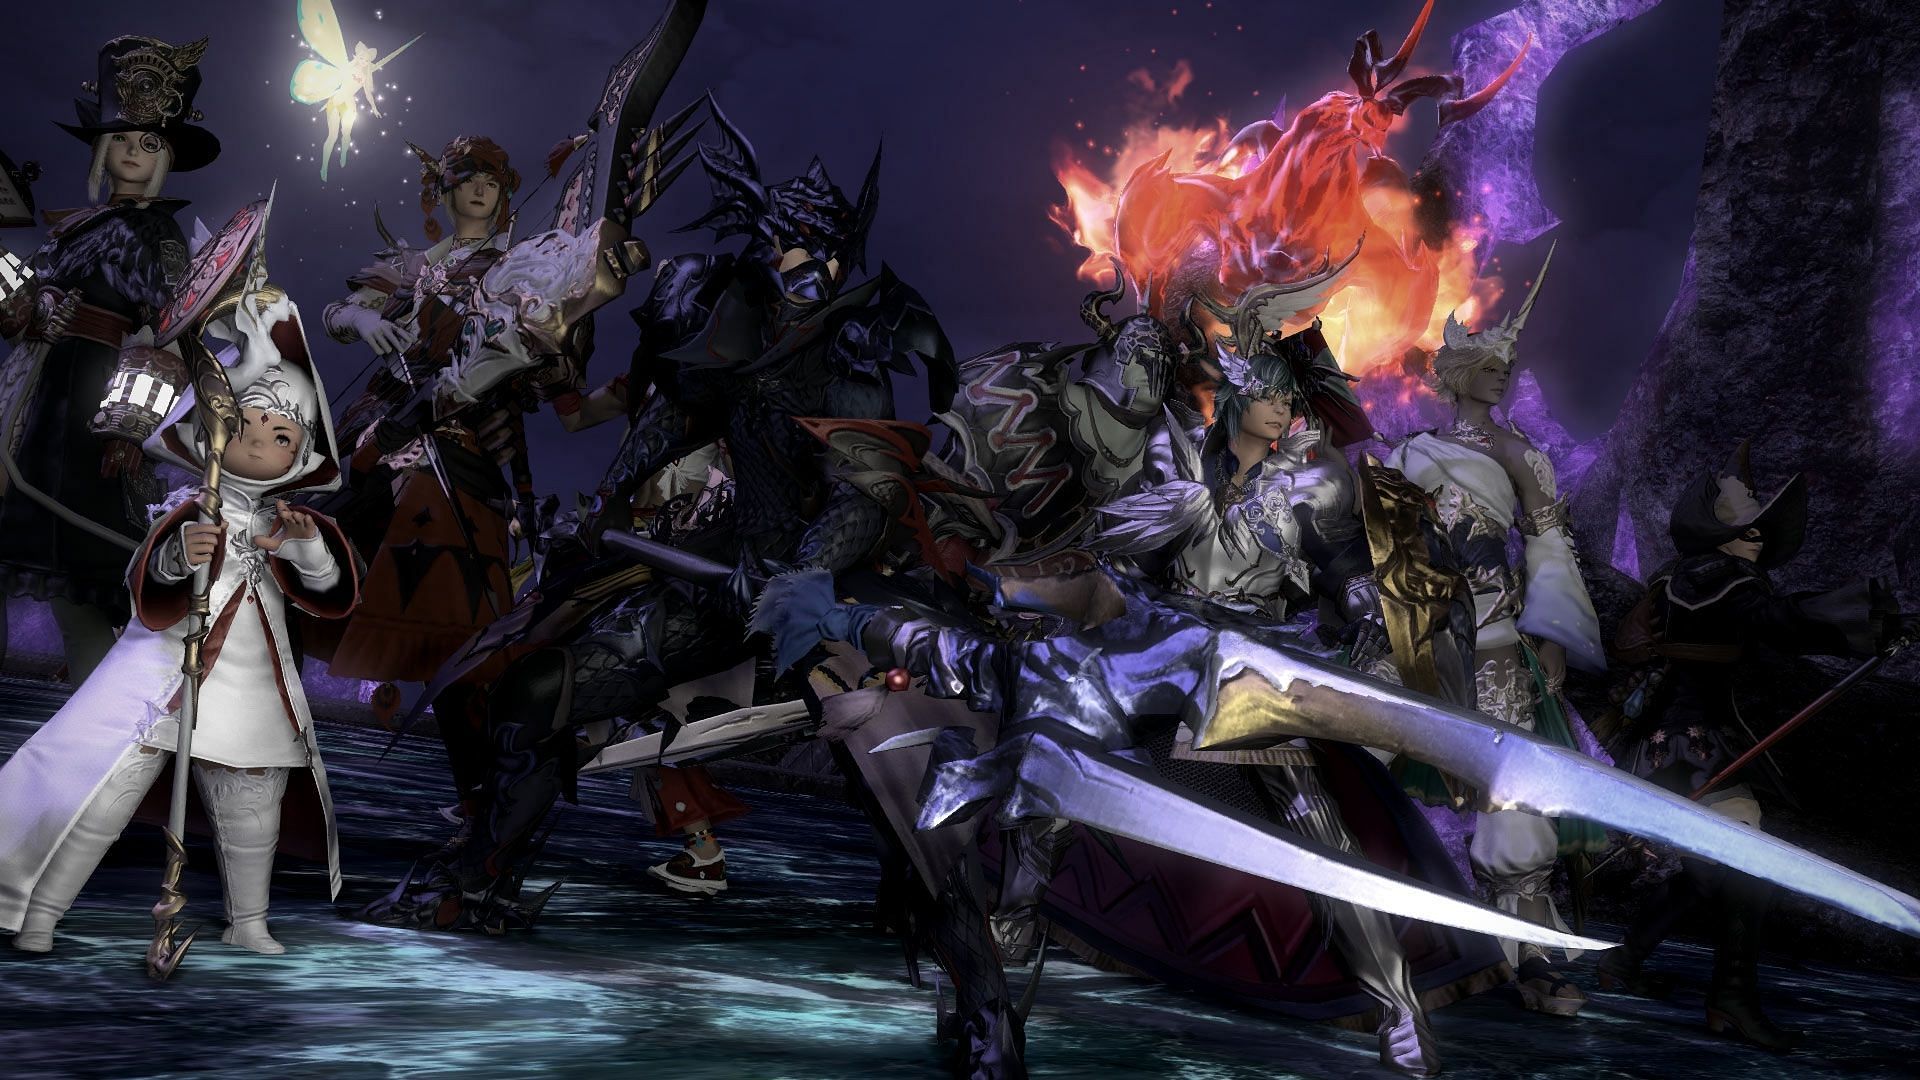 Official imagery for Final Fantasy XIV (Image via Square Enix)